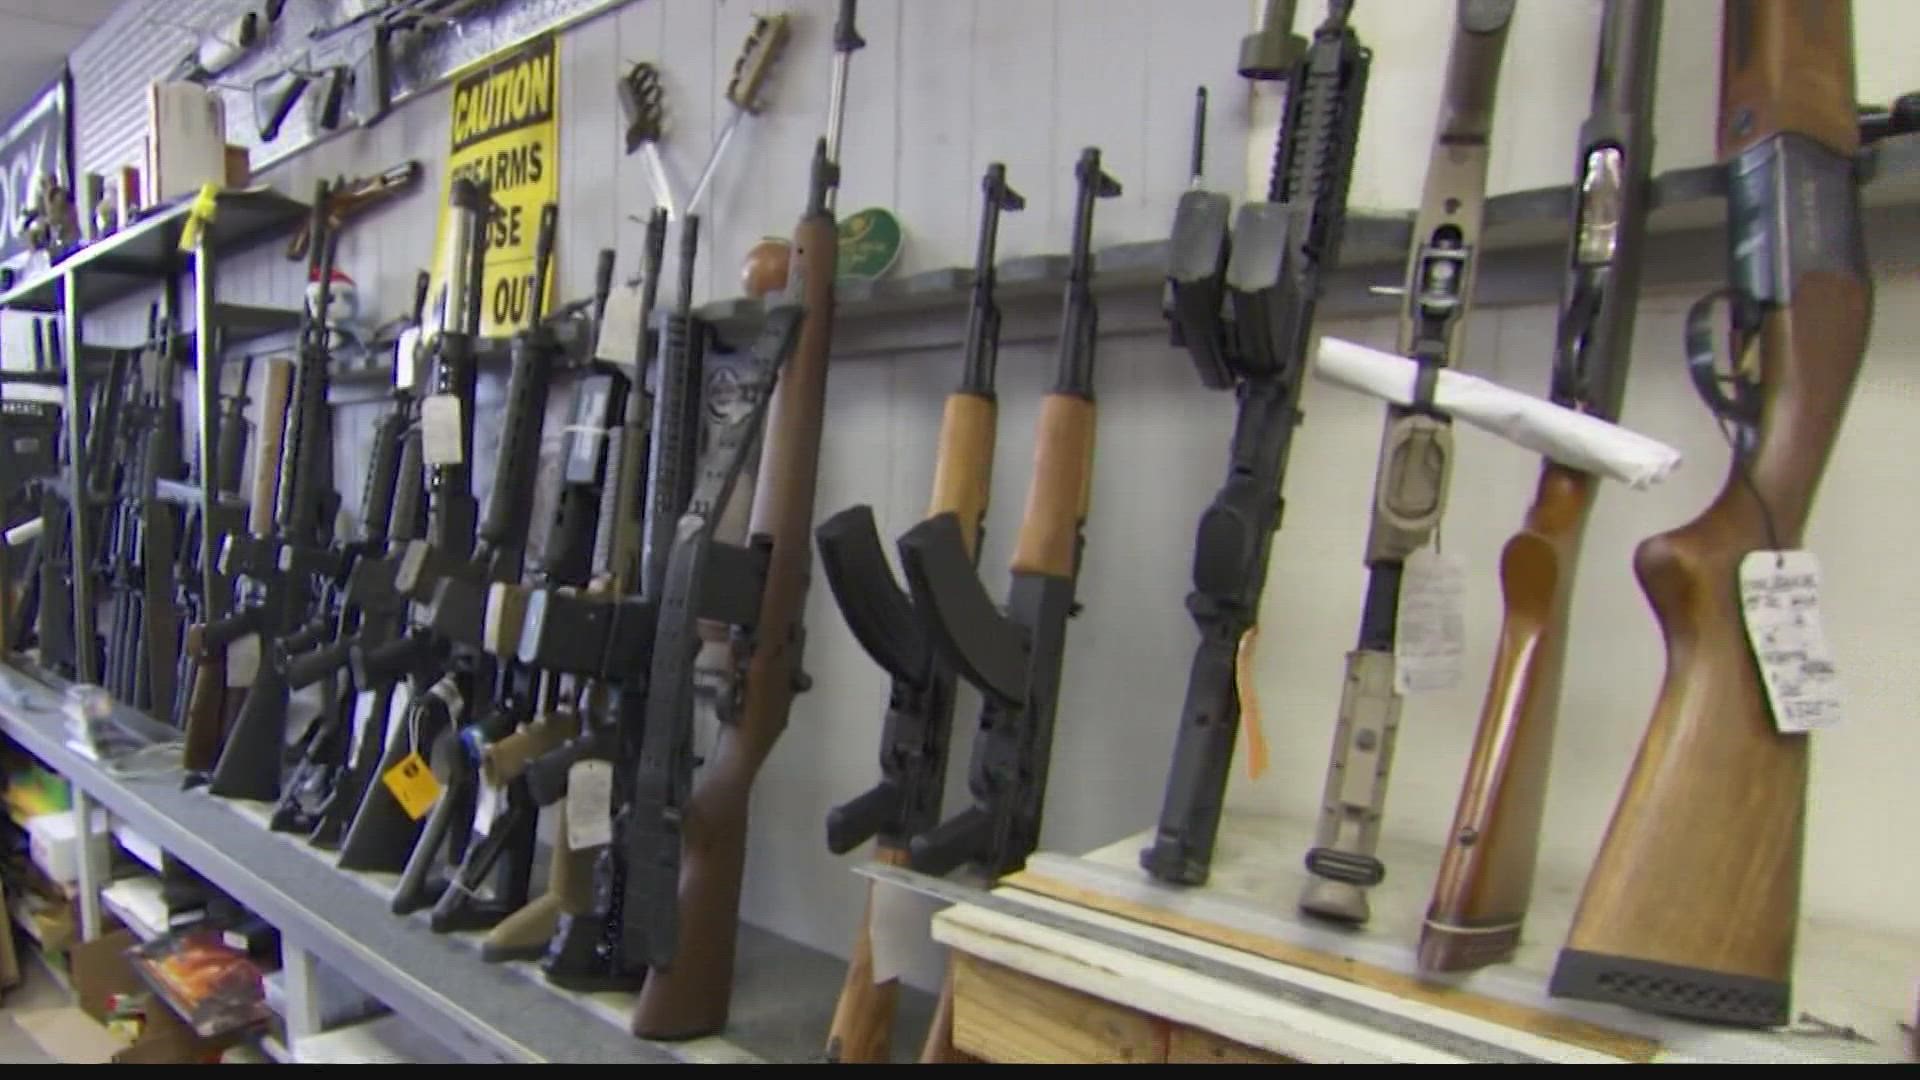 Even though this involves New York State, local gun owners are weighing in on the decision.